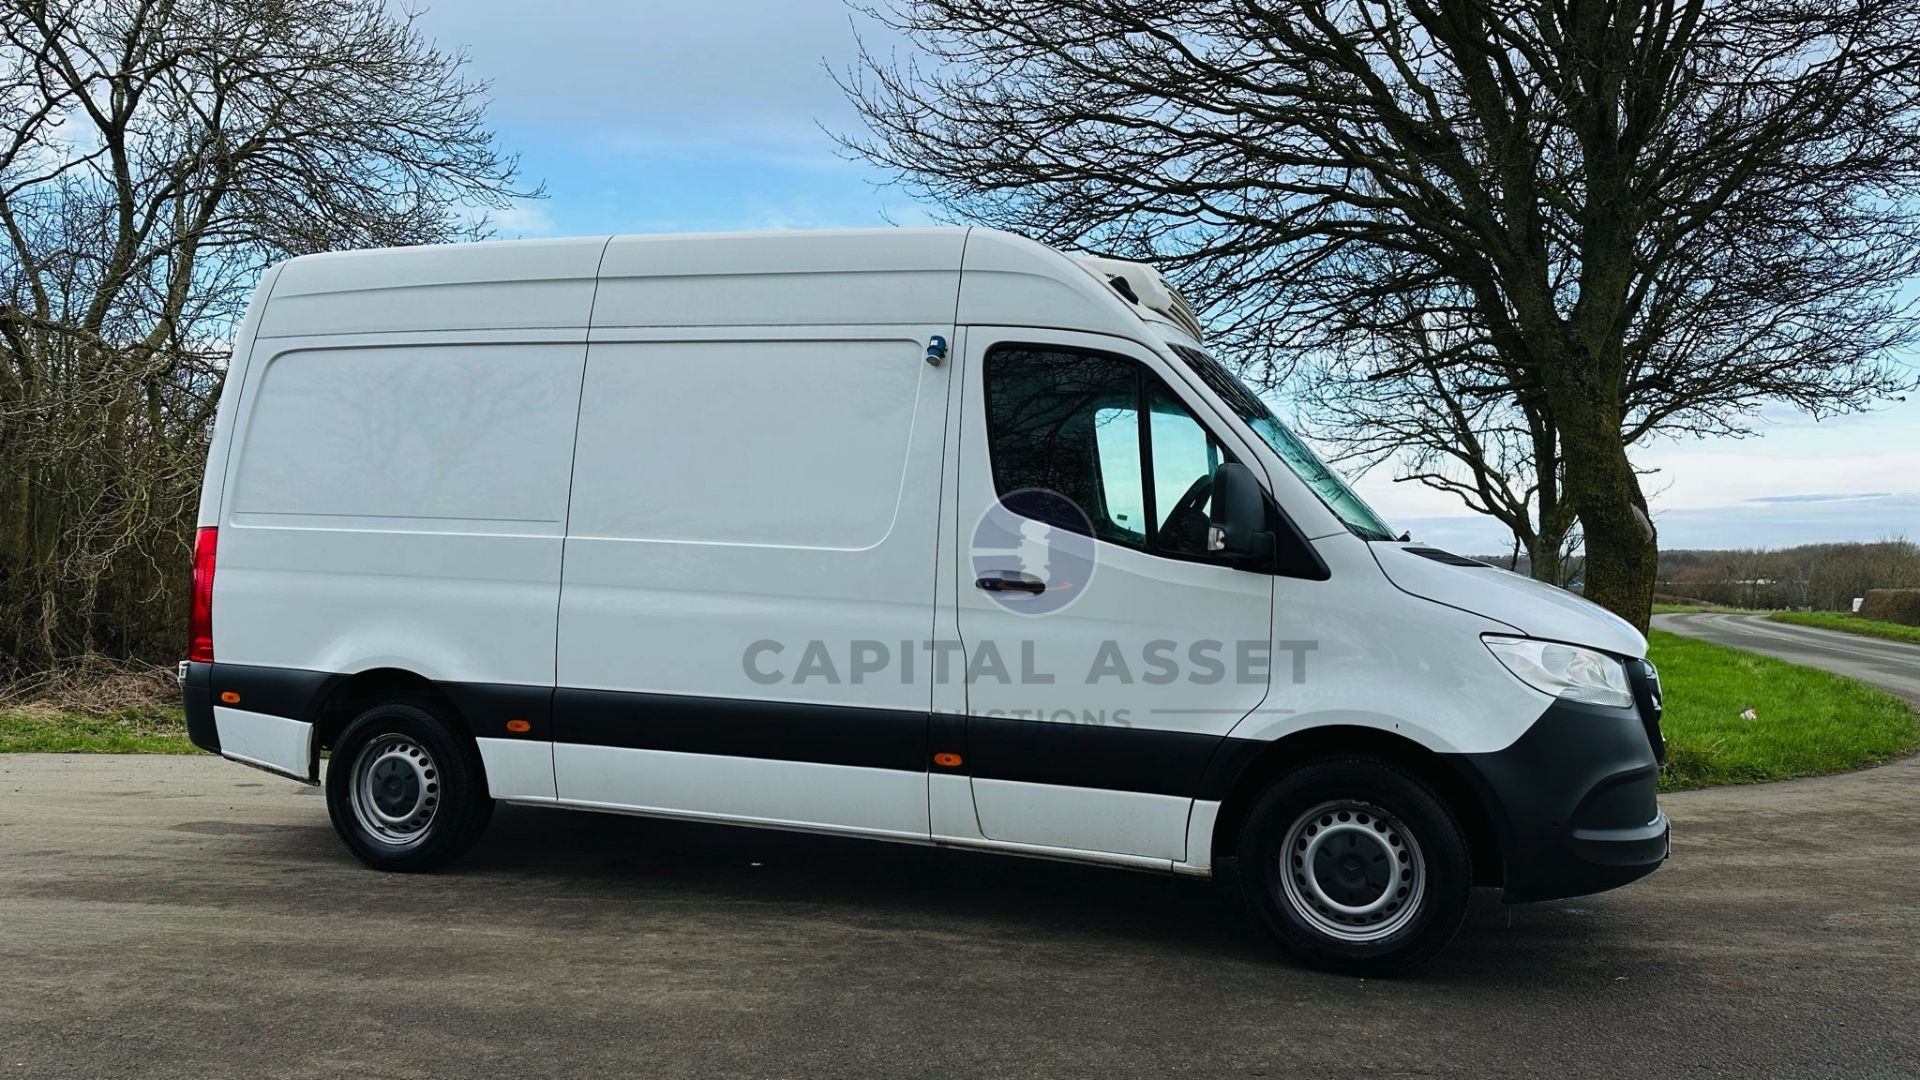 MERCEDES-BENZ SPRINTER 314 CDI *MWB - REFRIGERATED VAN* (2019 - FACELIFT MODEL) *OVERNIGHT STANDBY* - Image 3 of 41